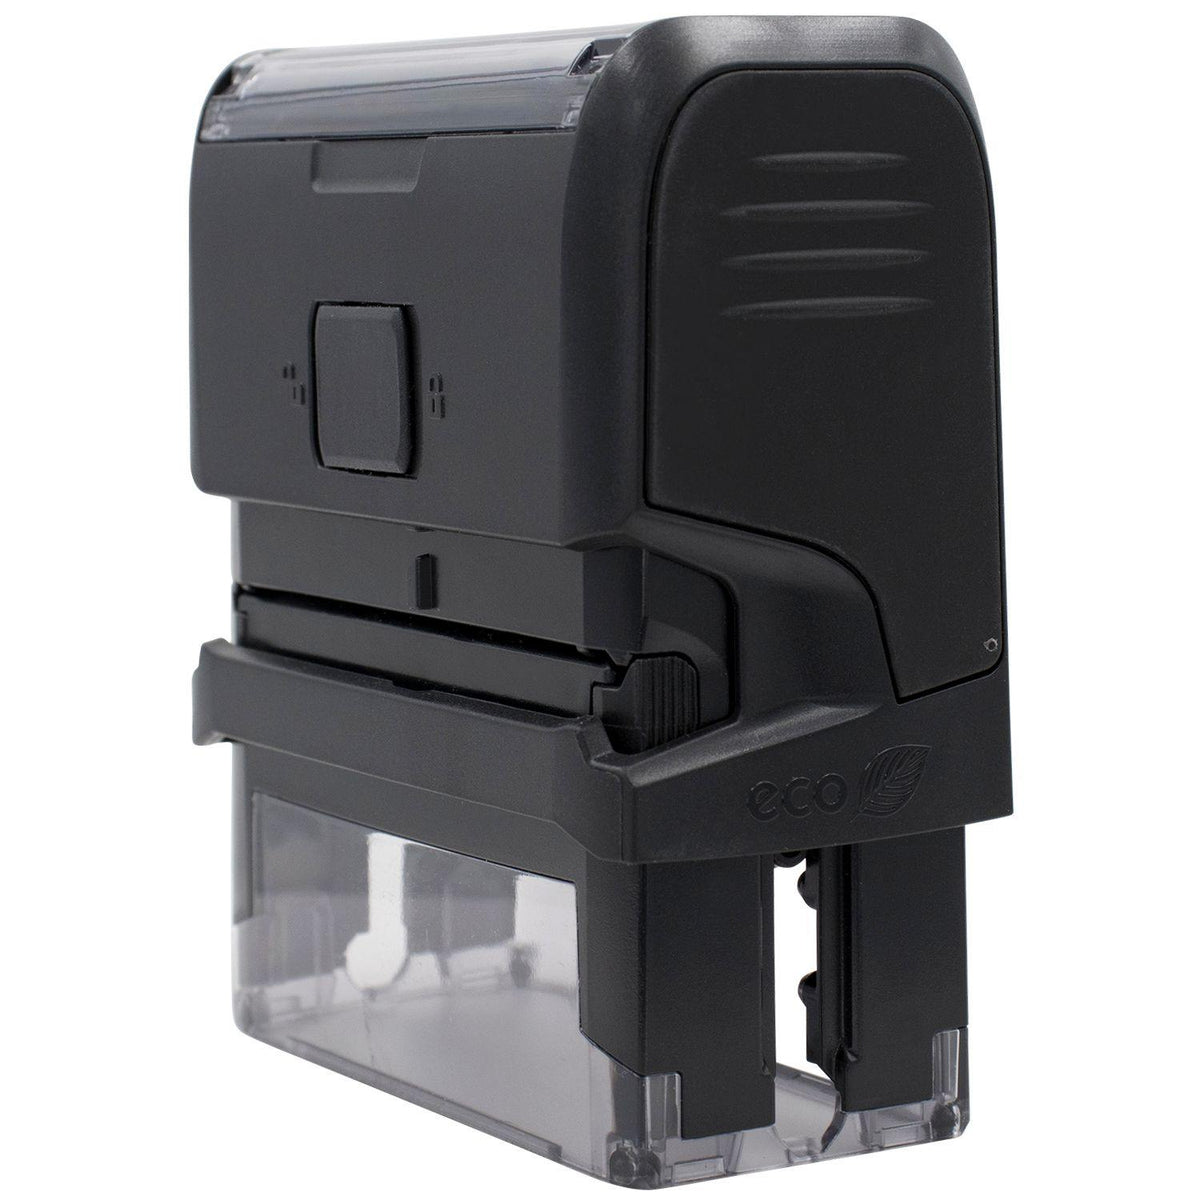 Large Self Inking Corrected Stamp - Engineer Seal Stamps - Brand_Trodat, Impression Size_Large, Stamp Type_Self-Inking Stamp, Type of Use_Teacher